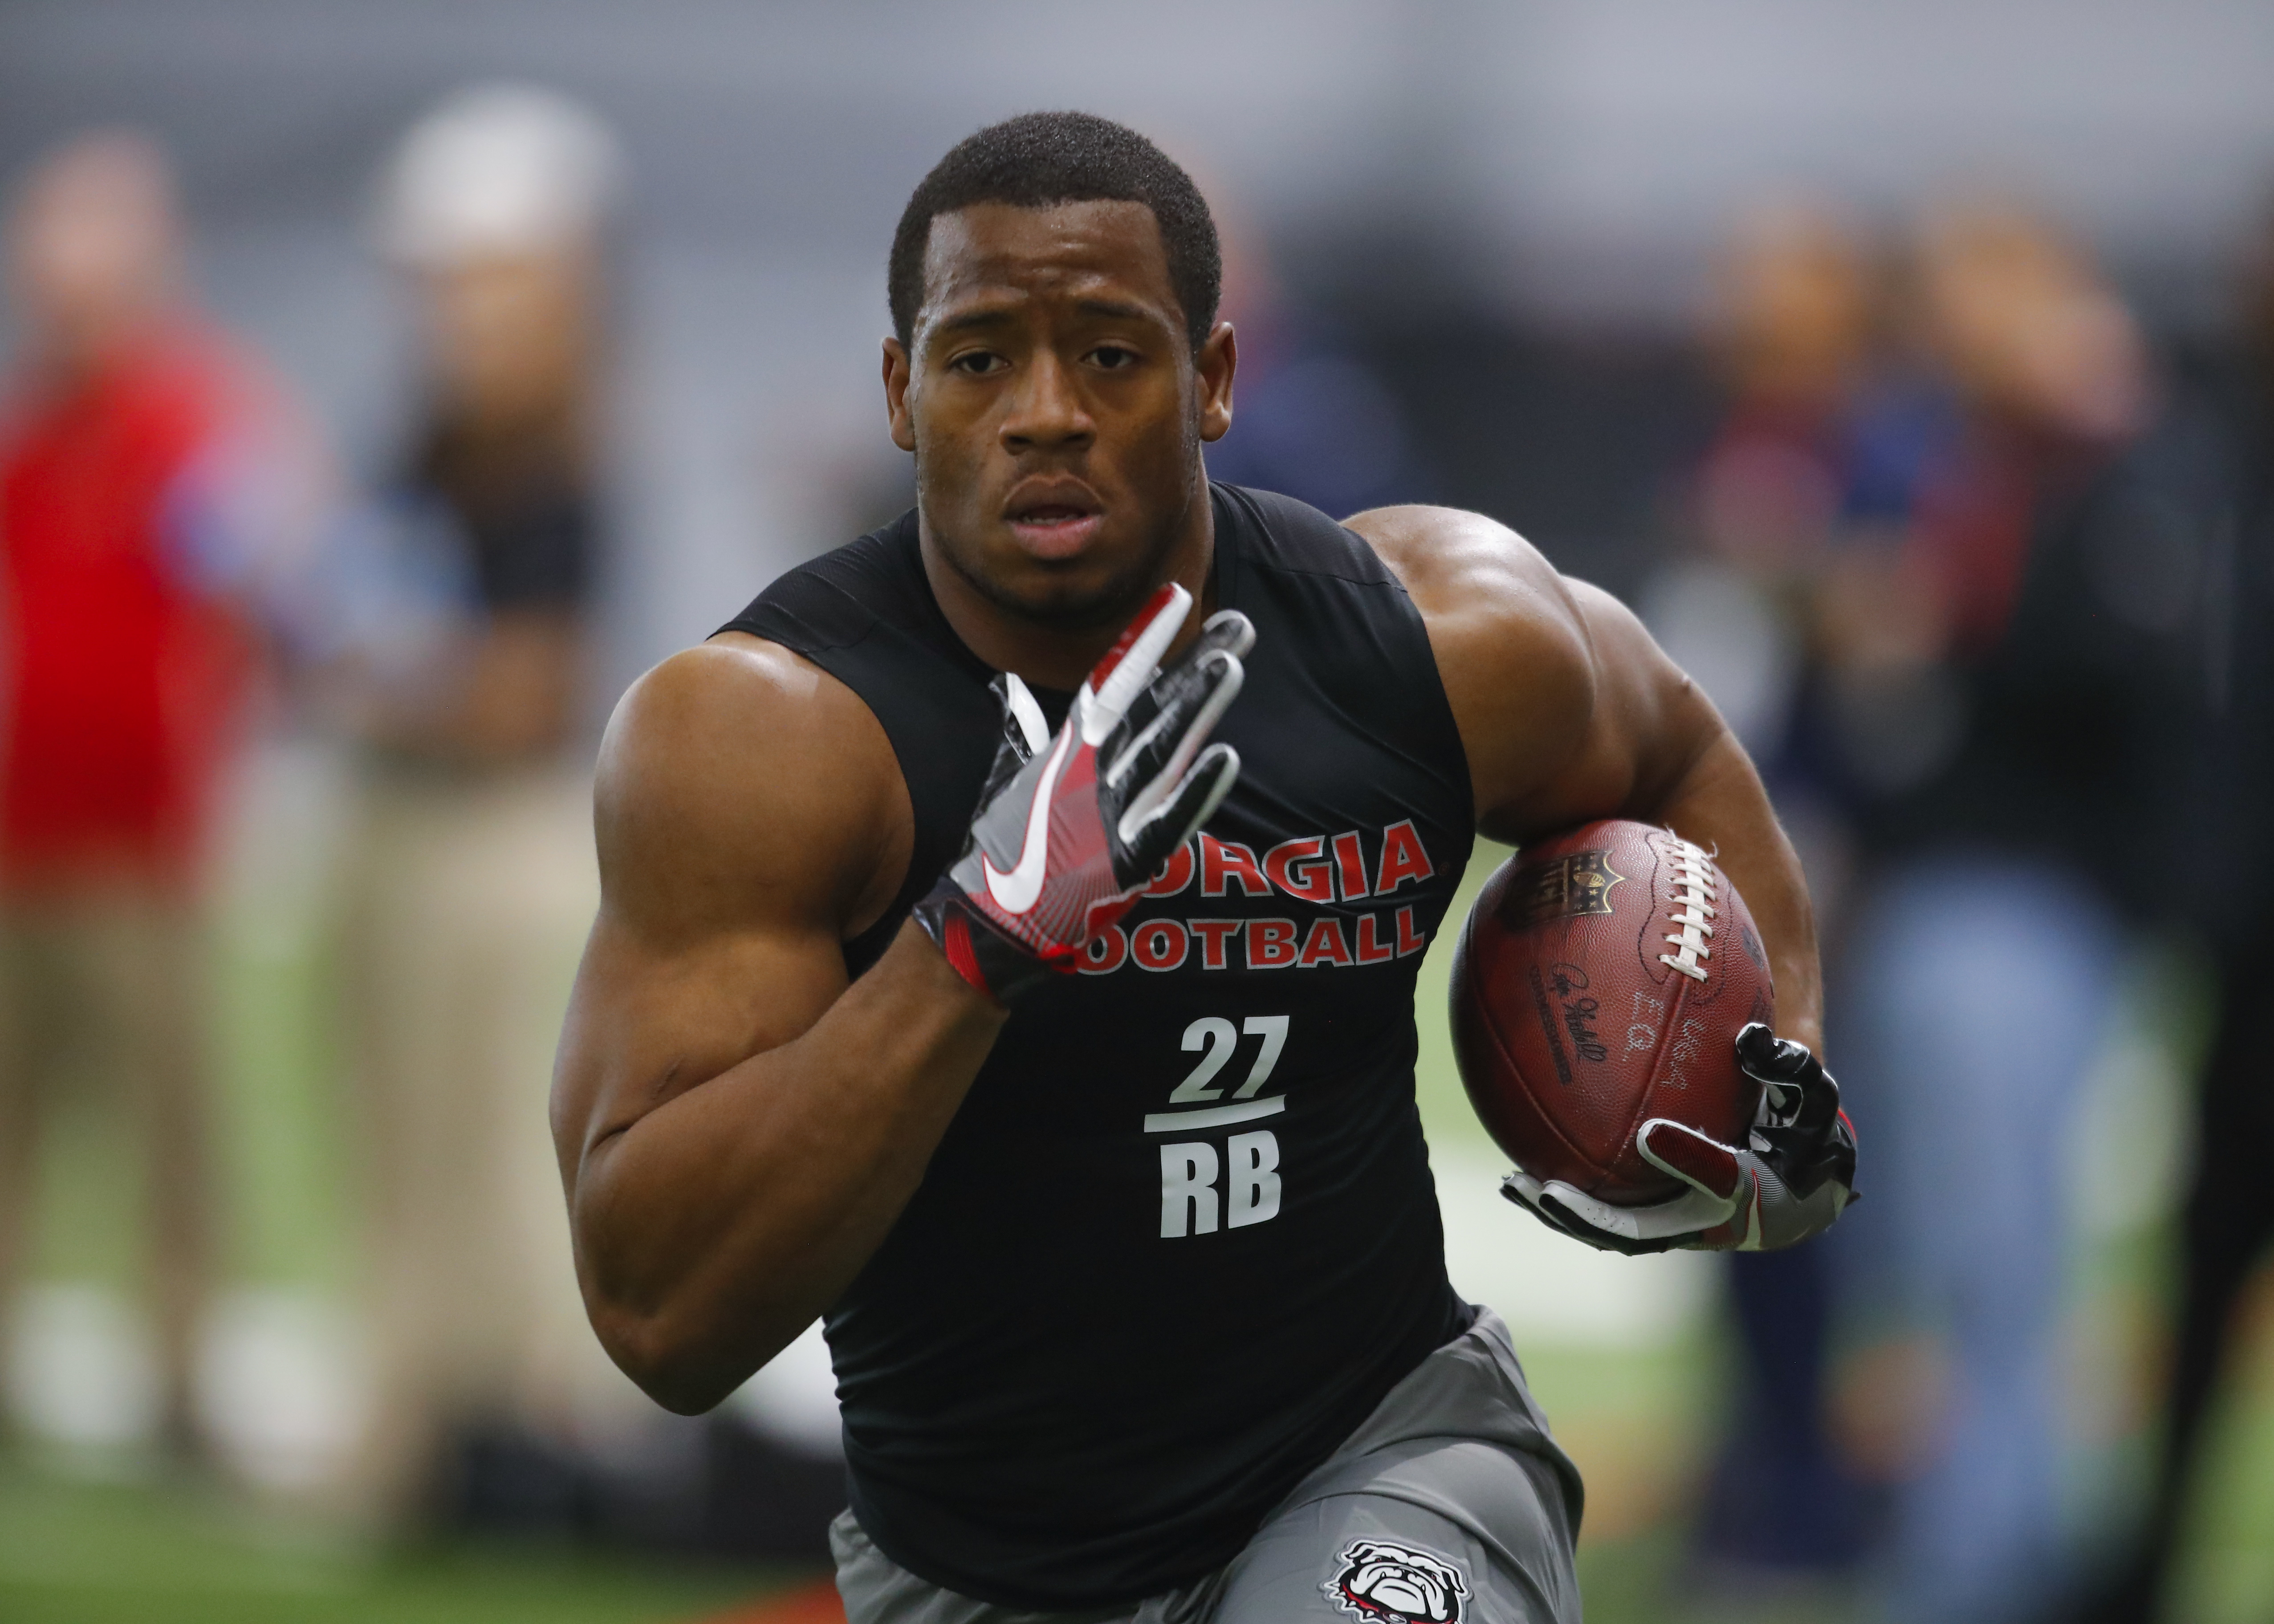 Injury put Nick Chubb under the radar, but he could be a gem in the